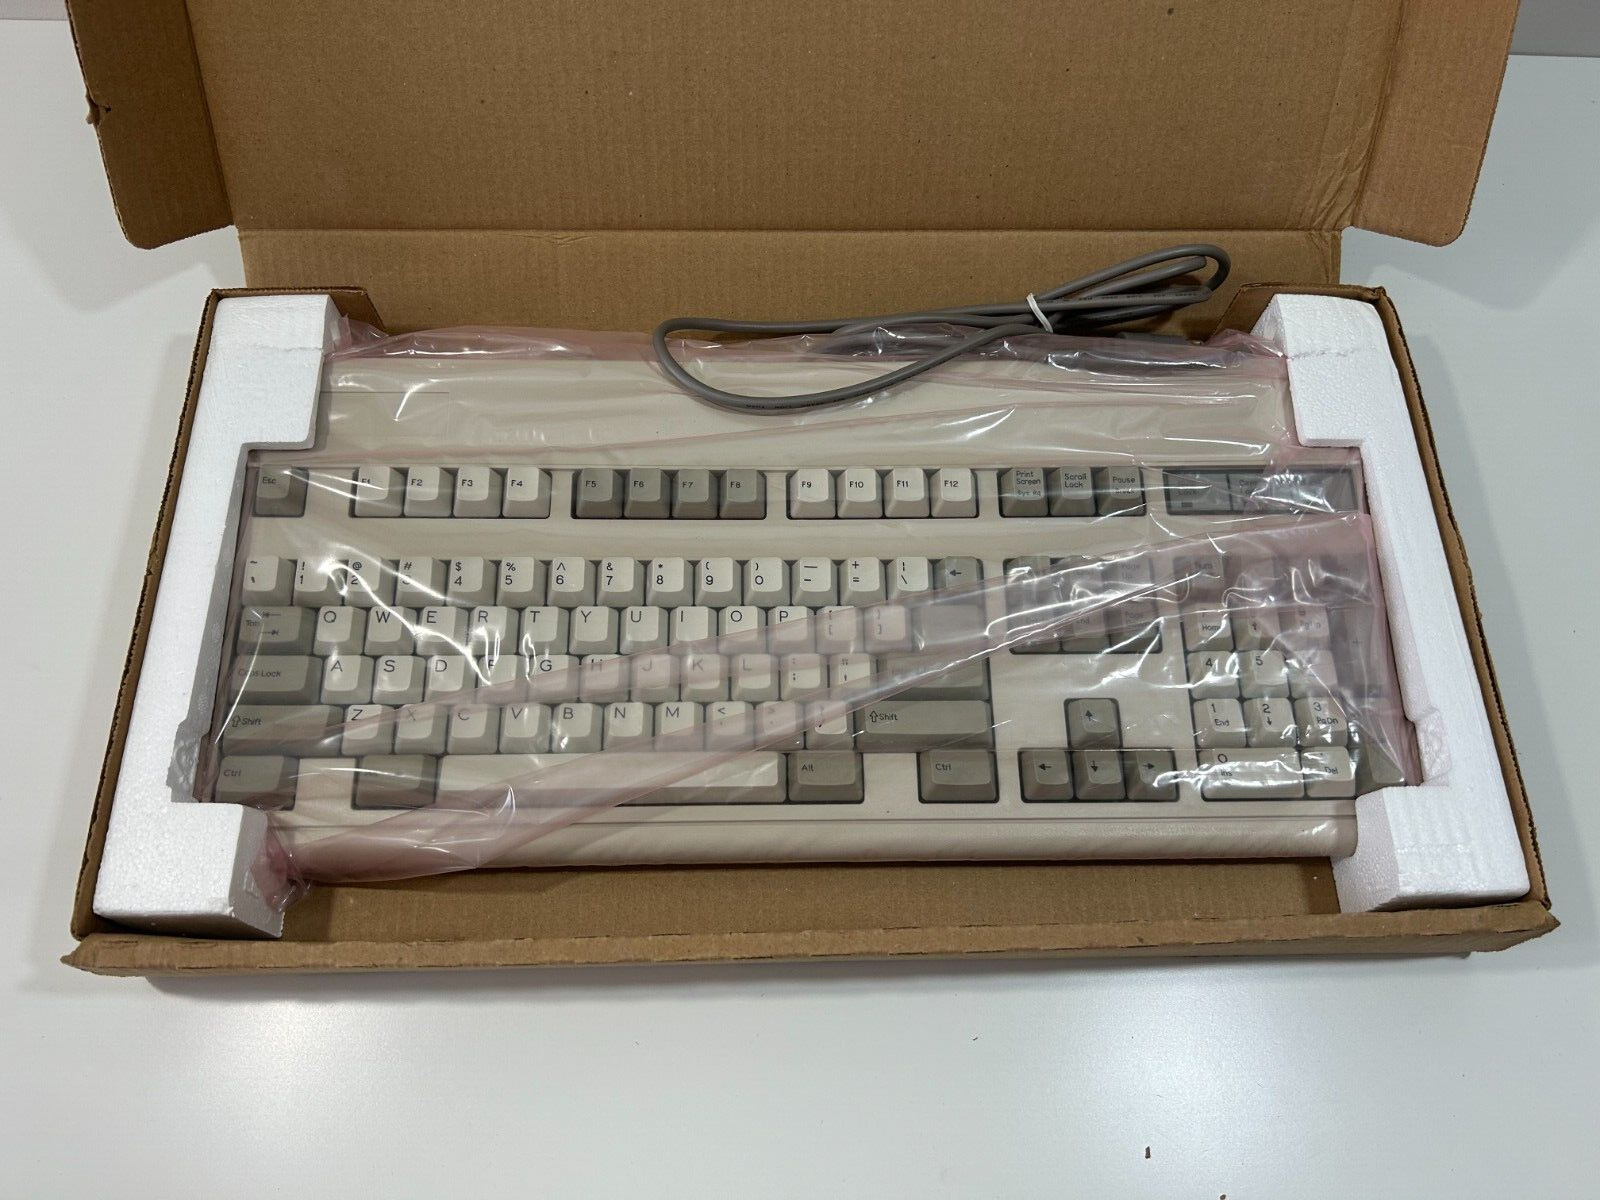 Vintage 2189001-00-003 AT PS/2 Maxi Switch KEYBOARD NOS Open Box